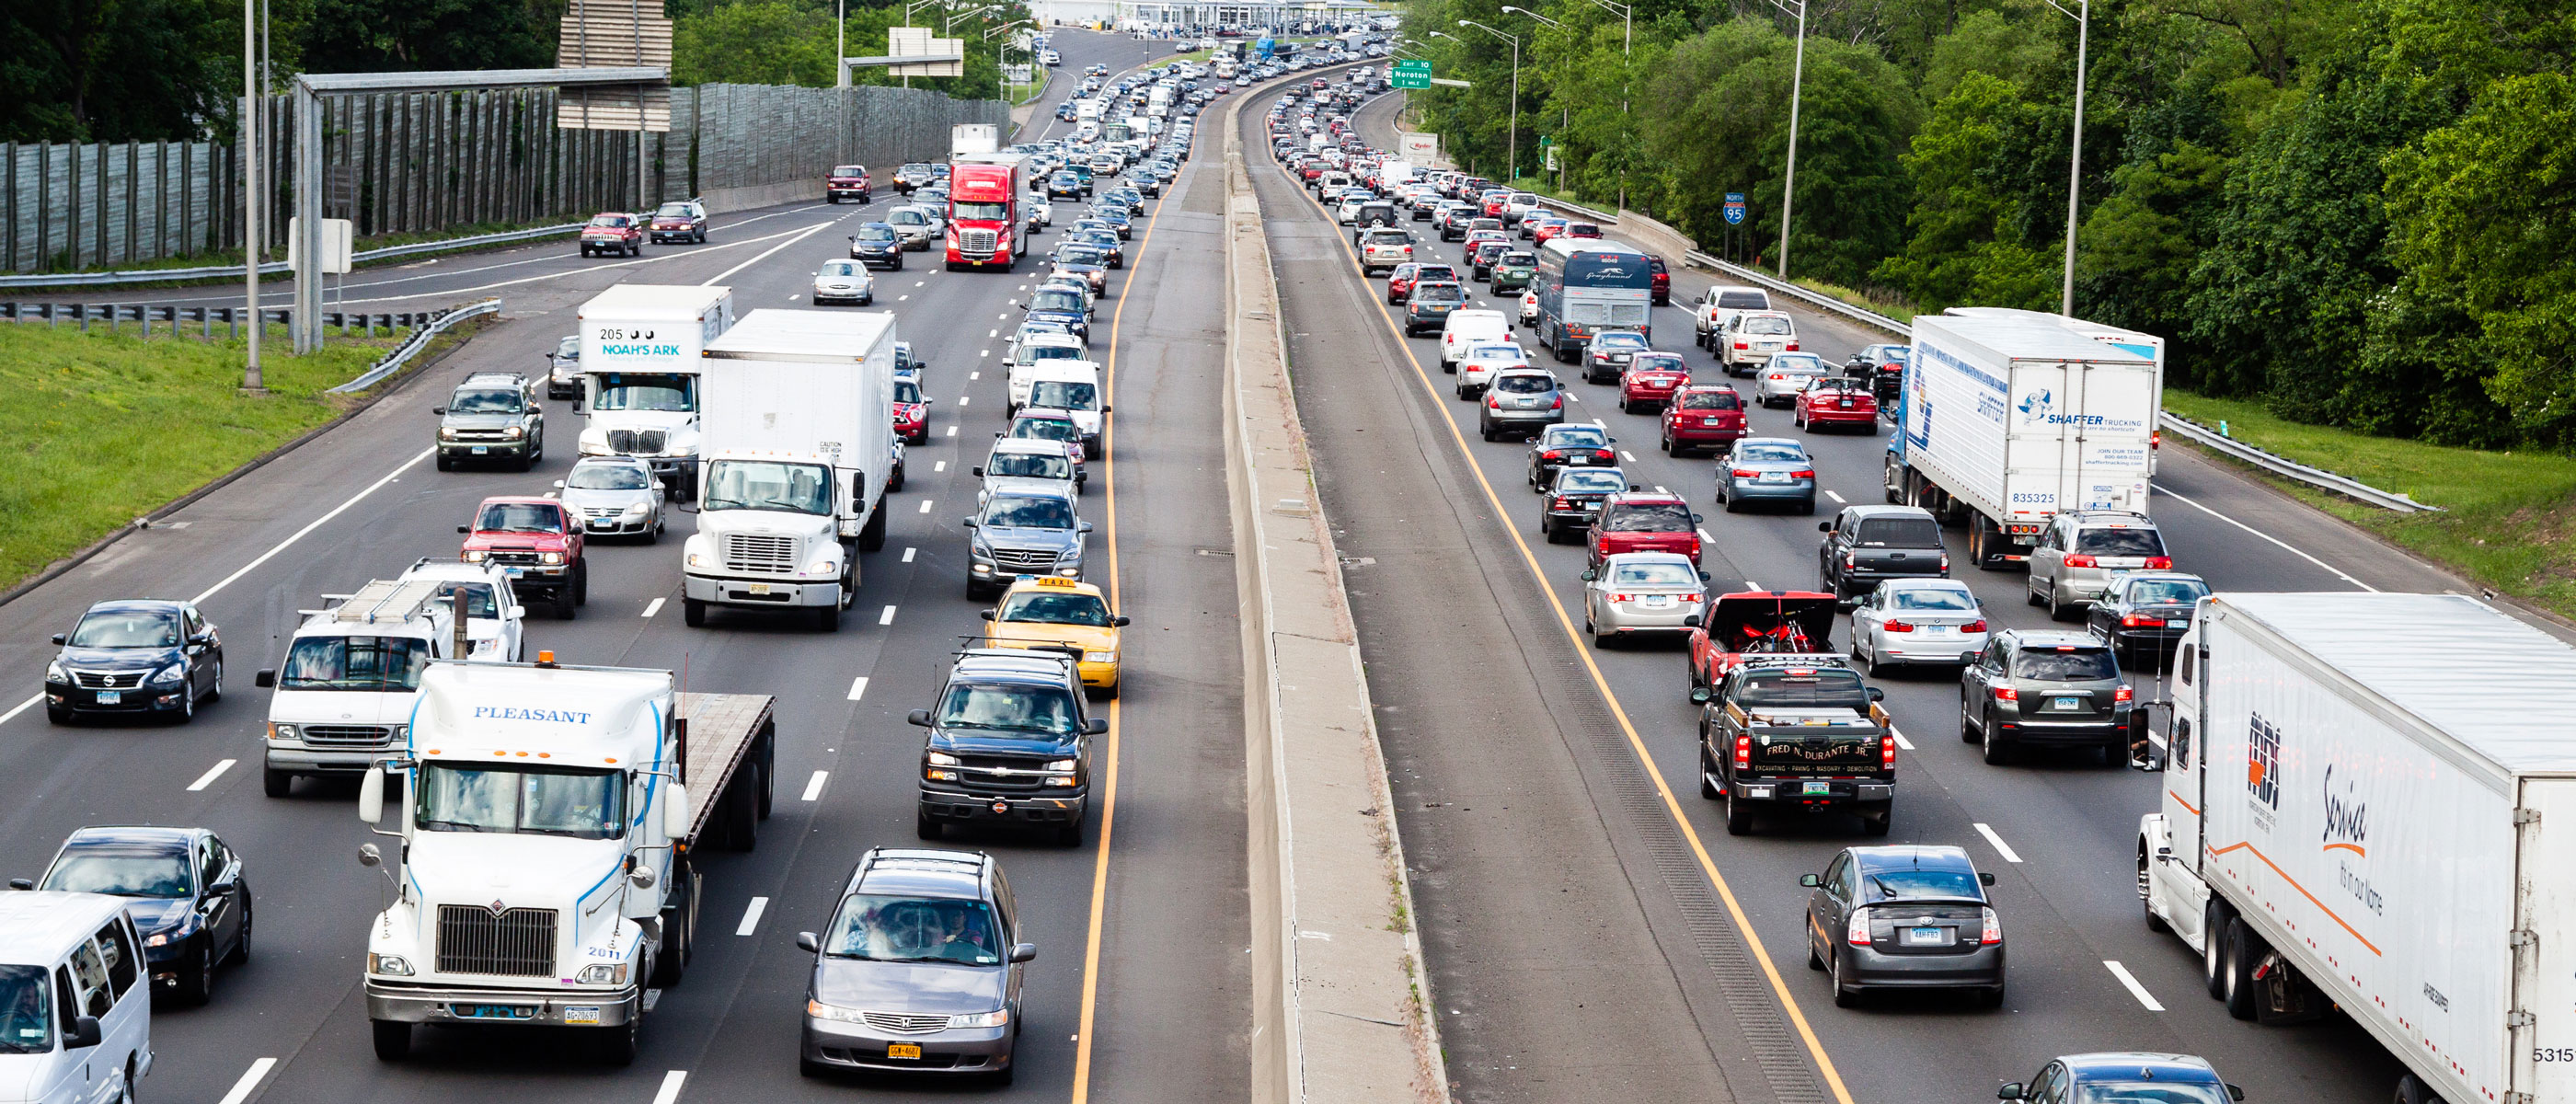 Reduce highway congestion without adding new lanes - The Fourth